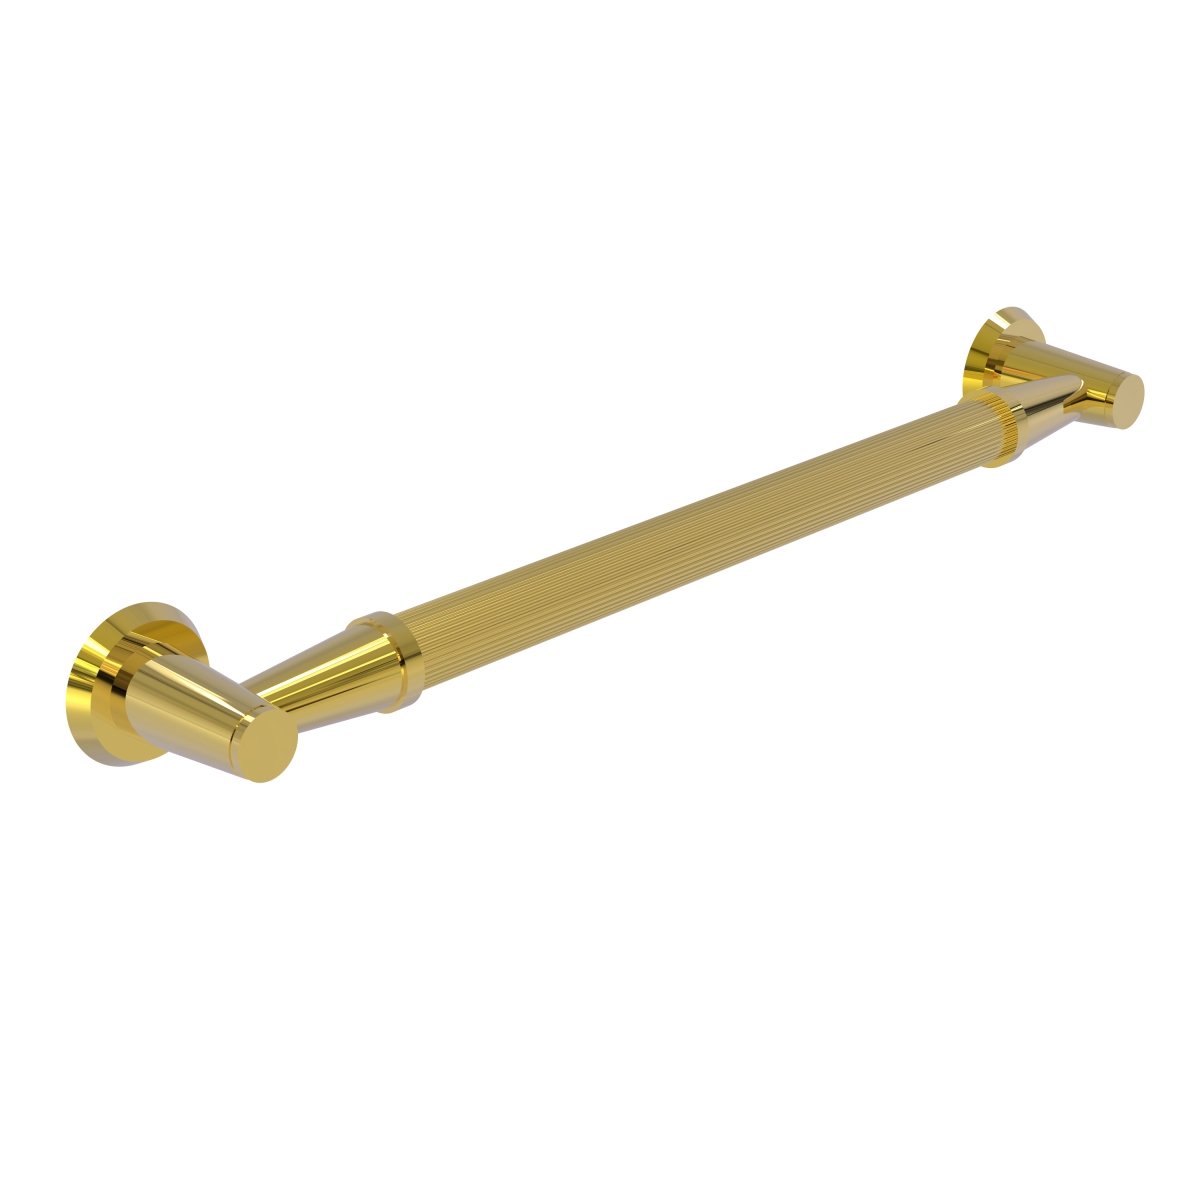 Picture of Allied Brass MD-GRR-24-PB 24 in. Reeded Grab Bar, Polished Brass - 3.5 x 26 x 24 in.